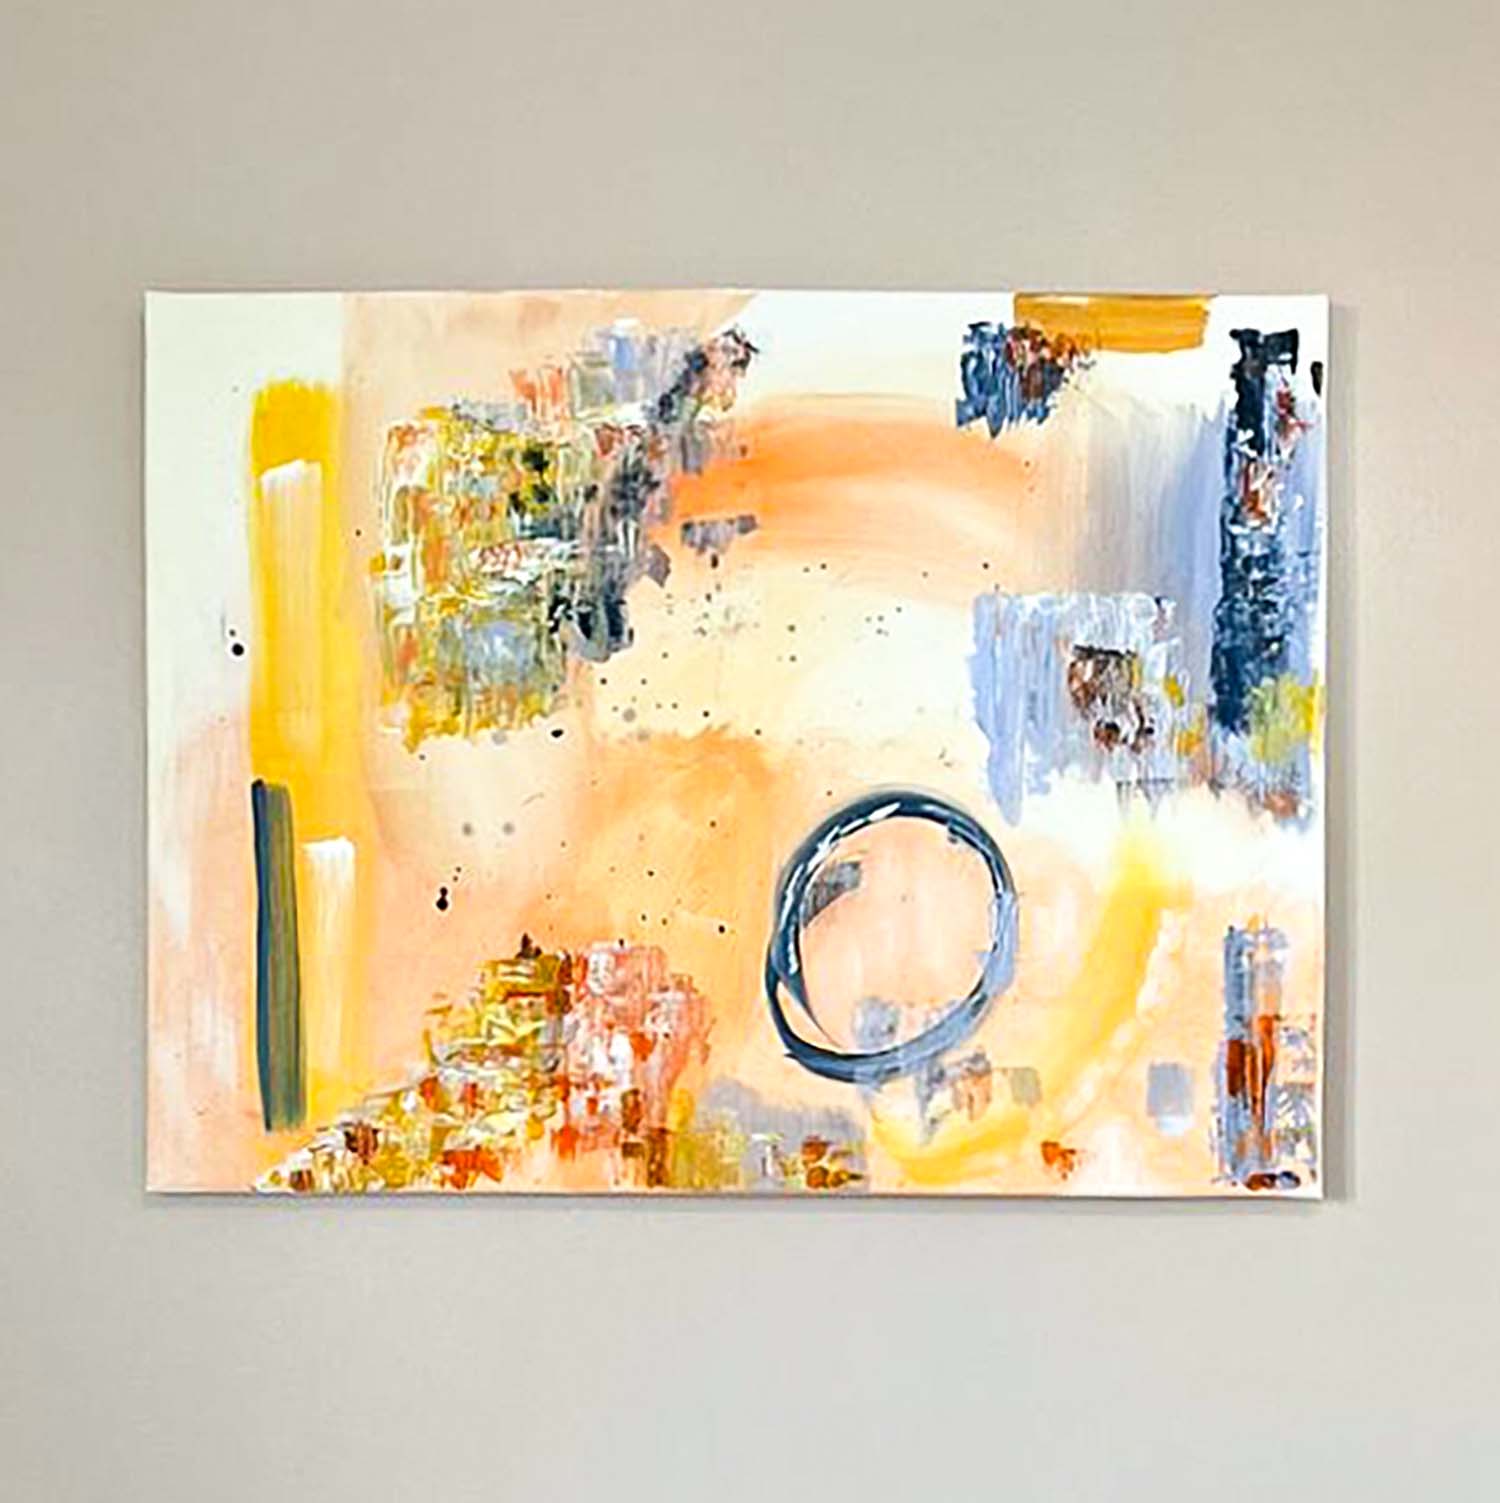 Original abstract painting, Interior decor art, Abstract spatula Painting  by Jafeth Moiane